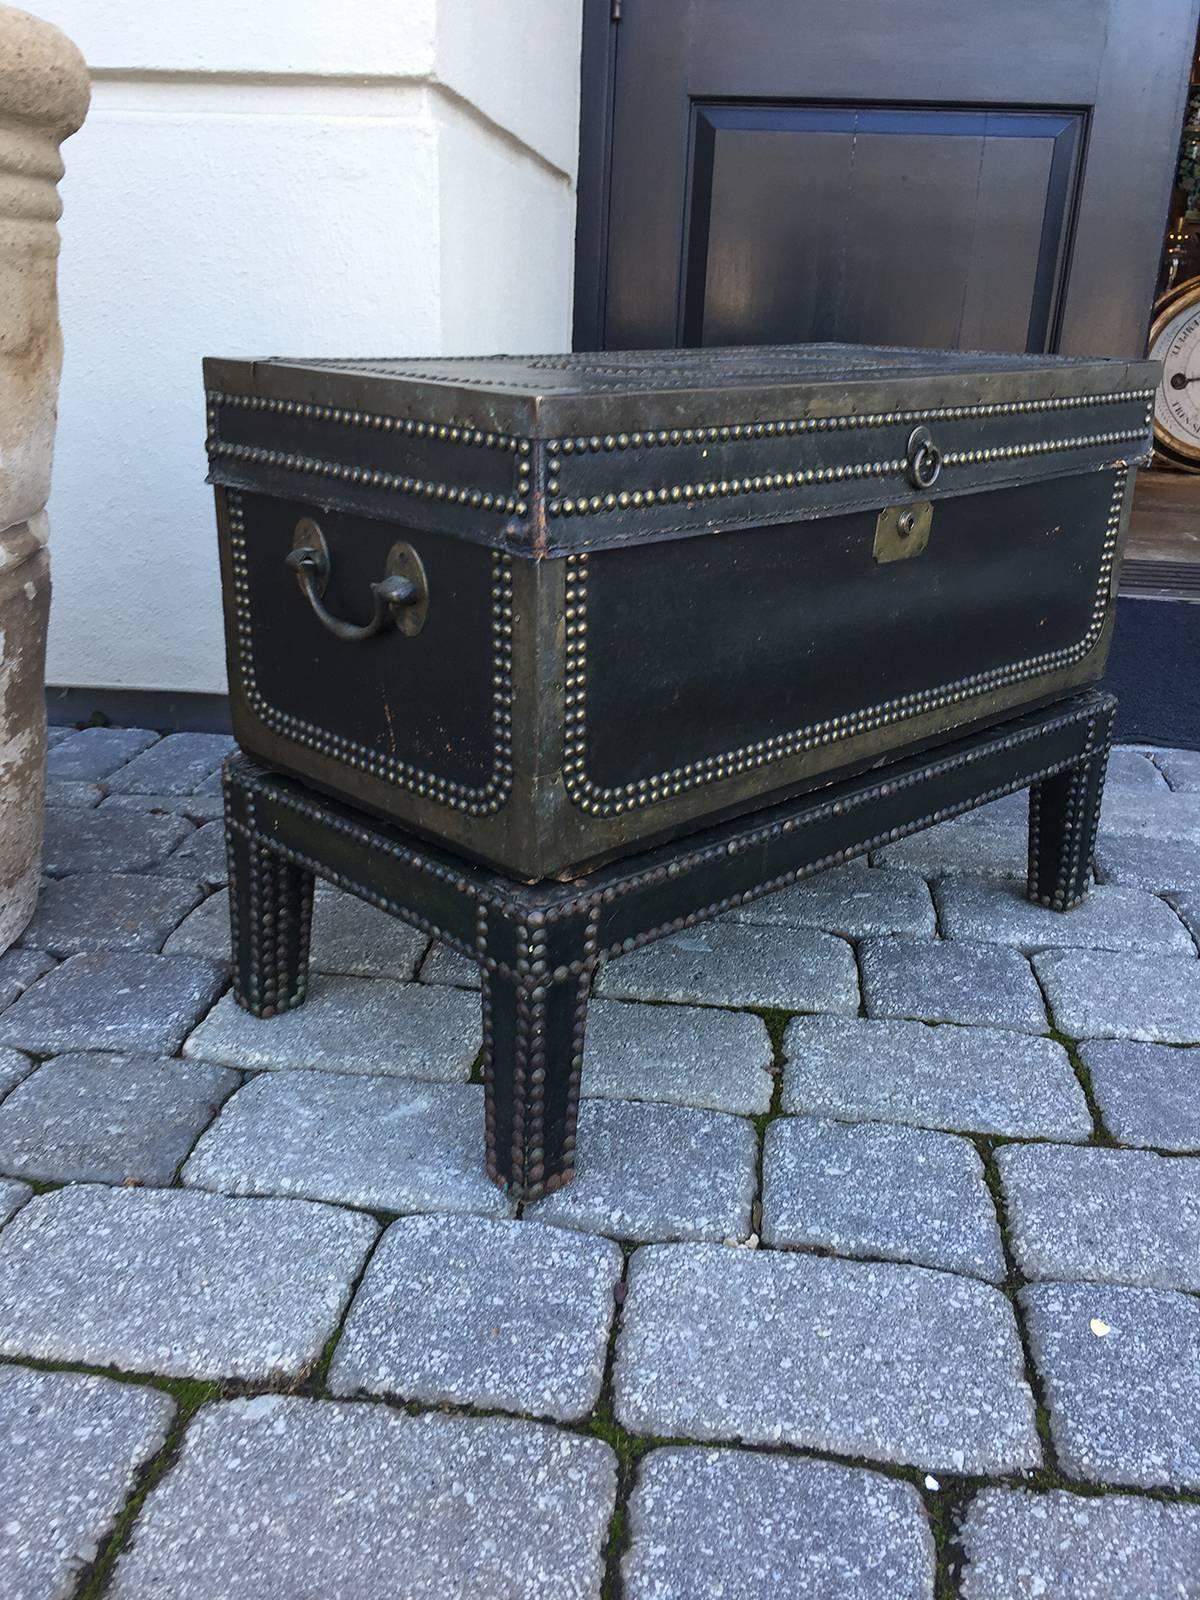 19th century English black leather trunk on stand.